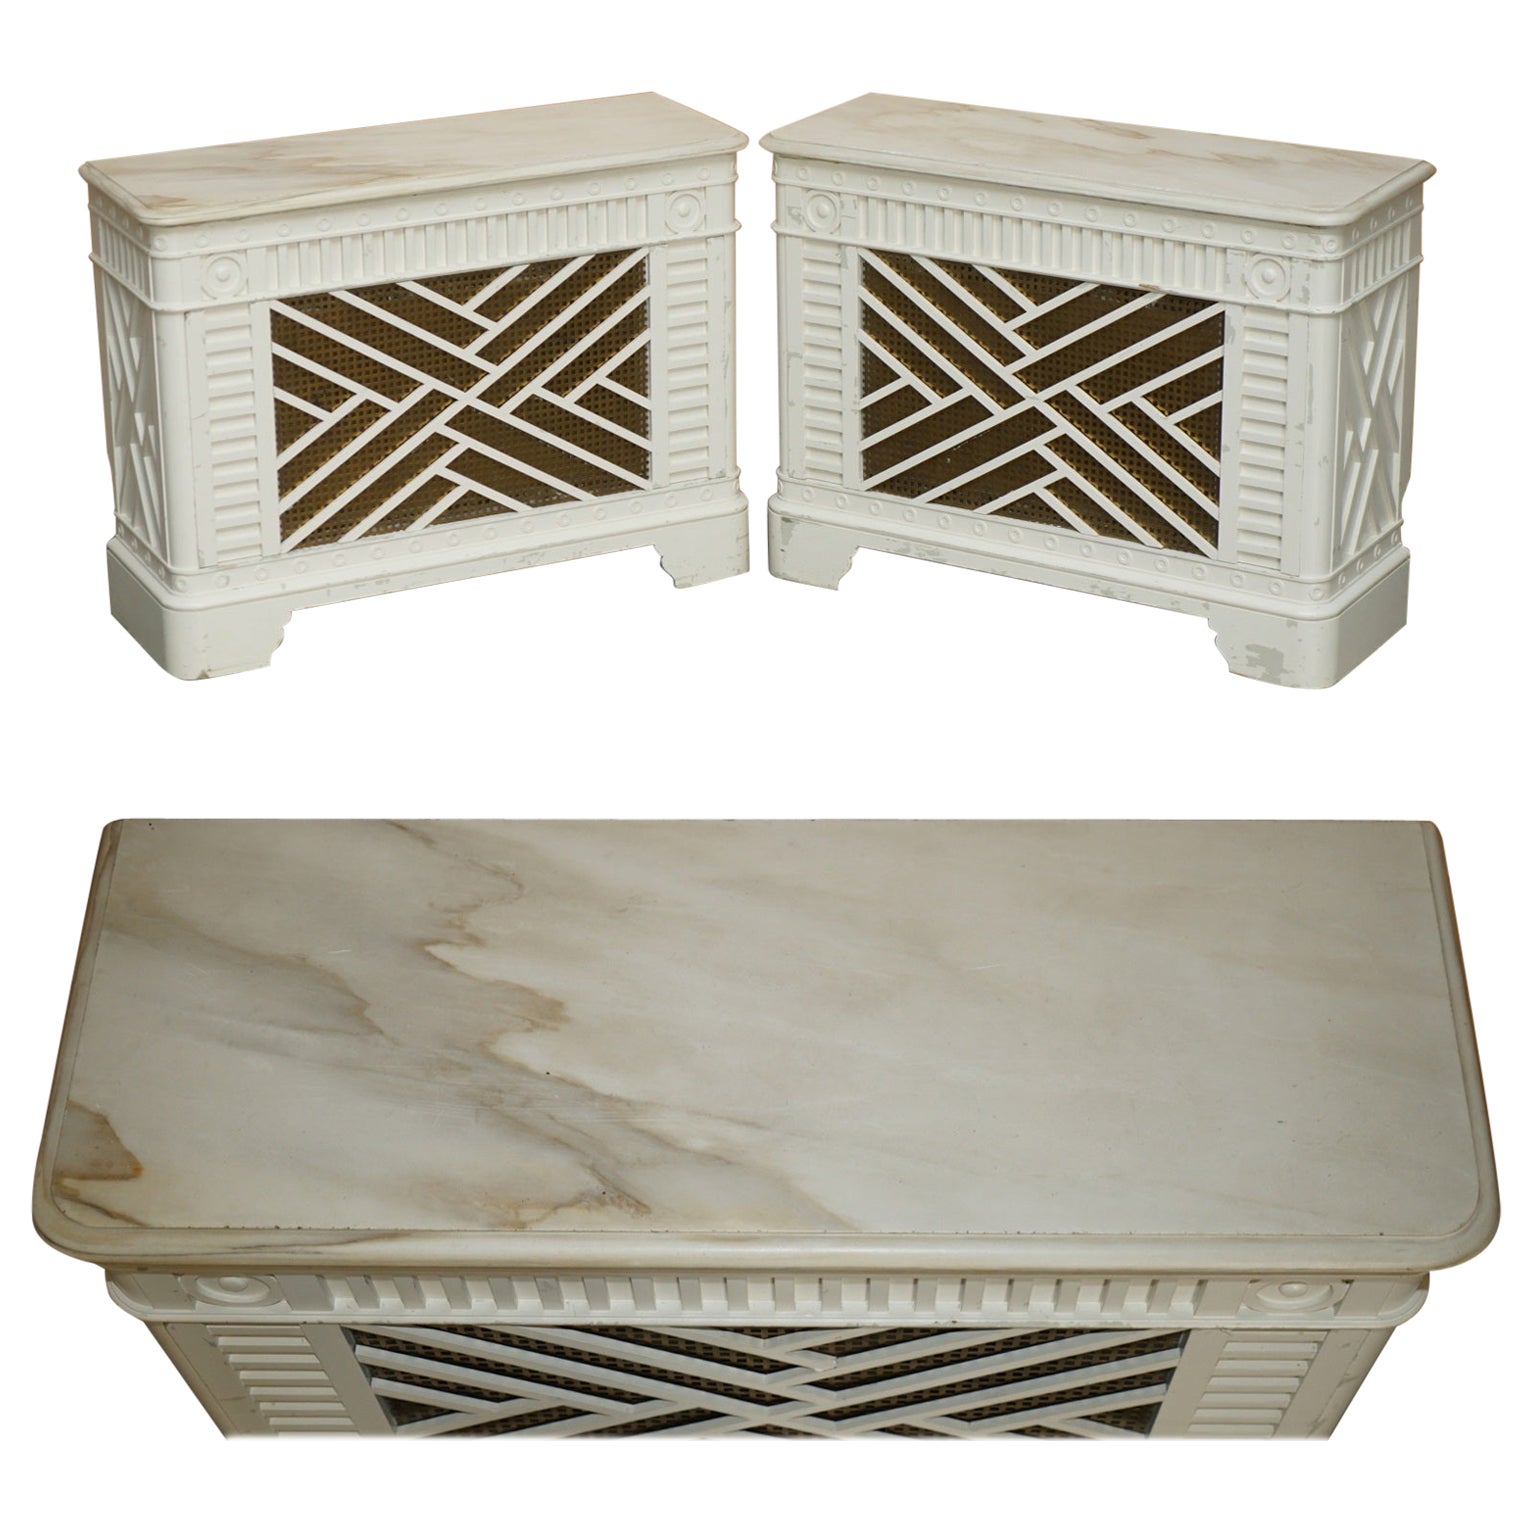 Pärchen von ViNTAGE ITALIAN CARRARA MARBLE TOPPED RADIATOR Covers REMOVABLE FRONTS